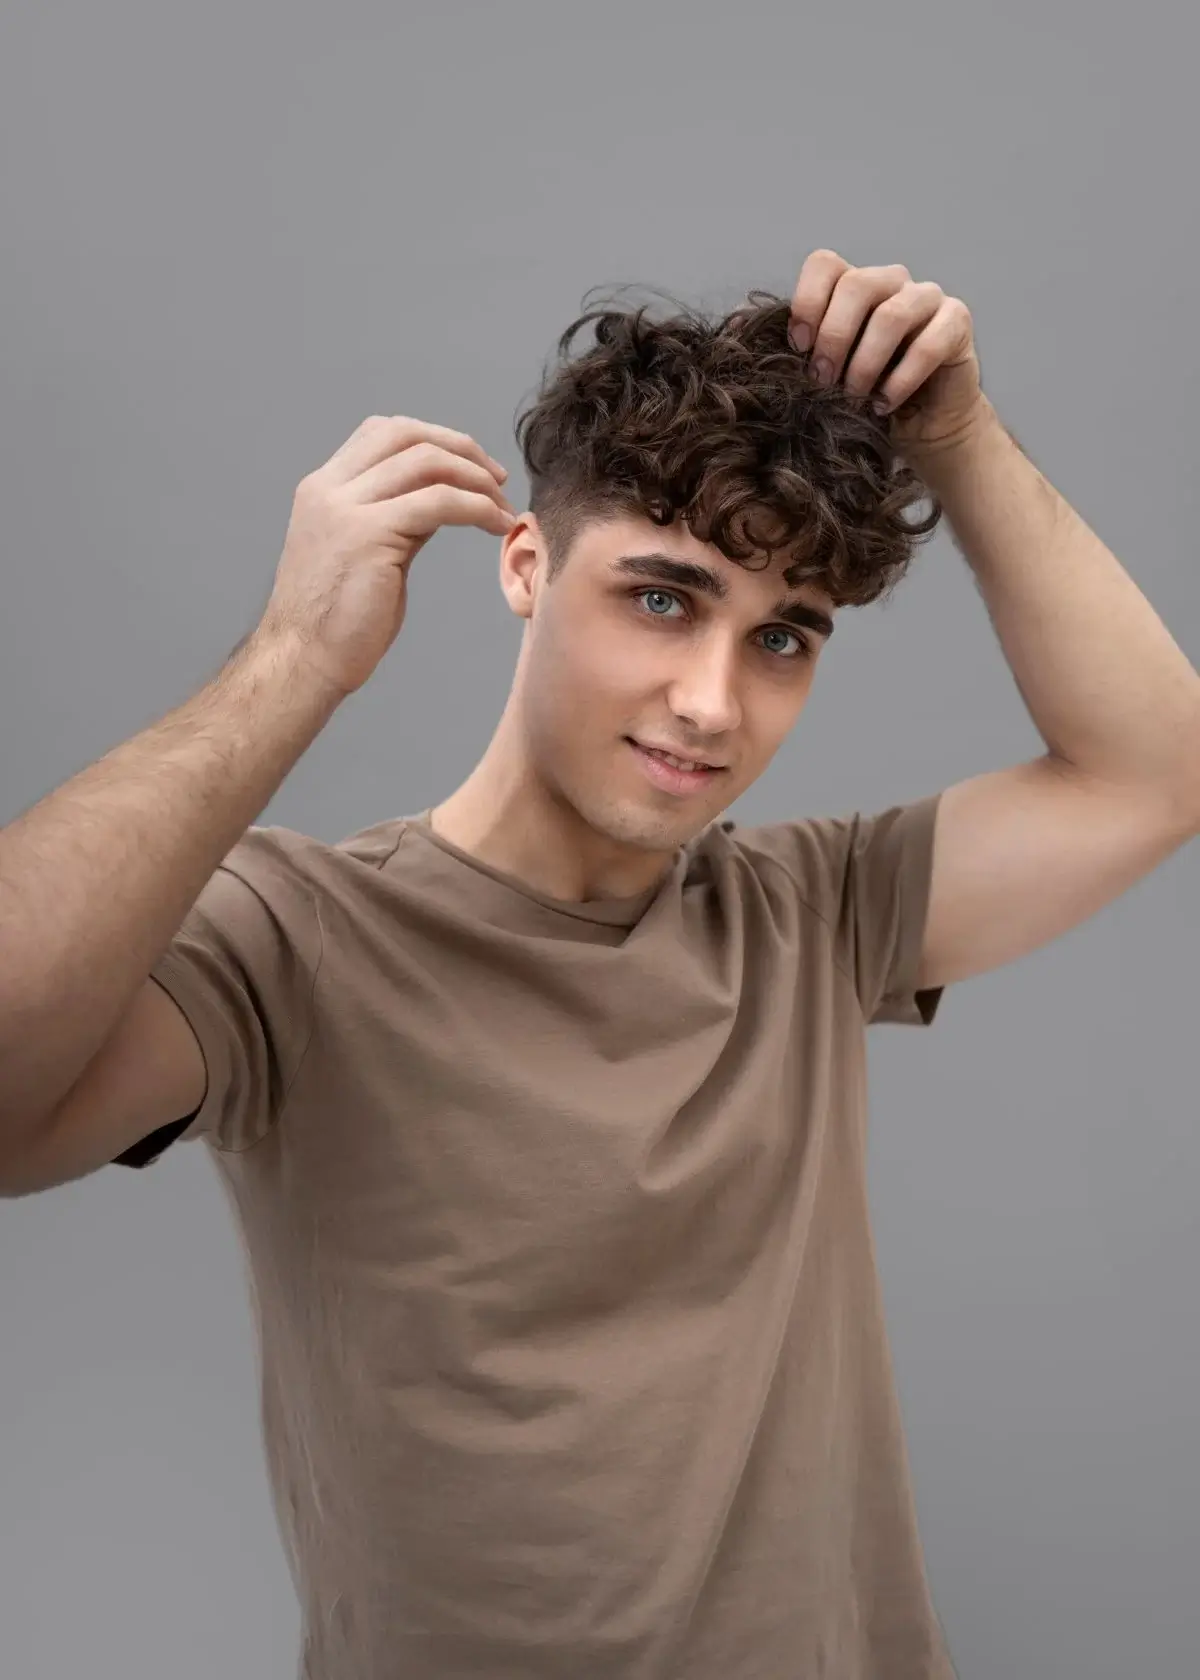 How to Choose the Right Shampoo for Curly Hair Men?